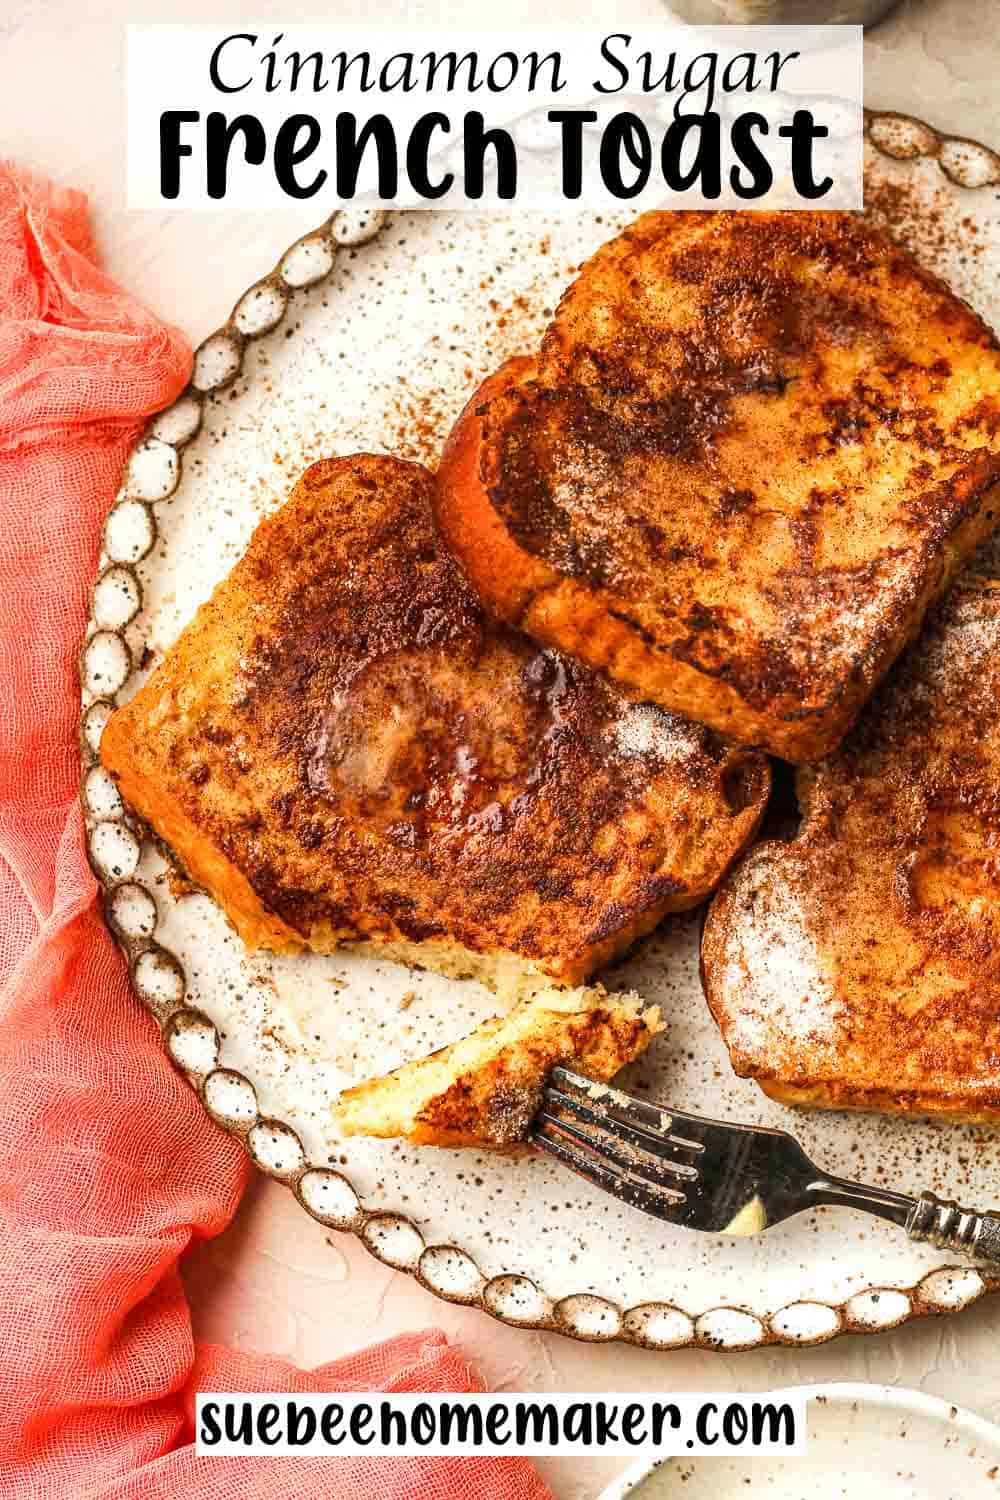 A plate of cinnamon sugar French toast.